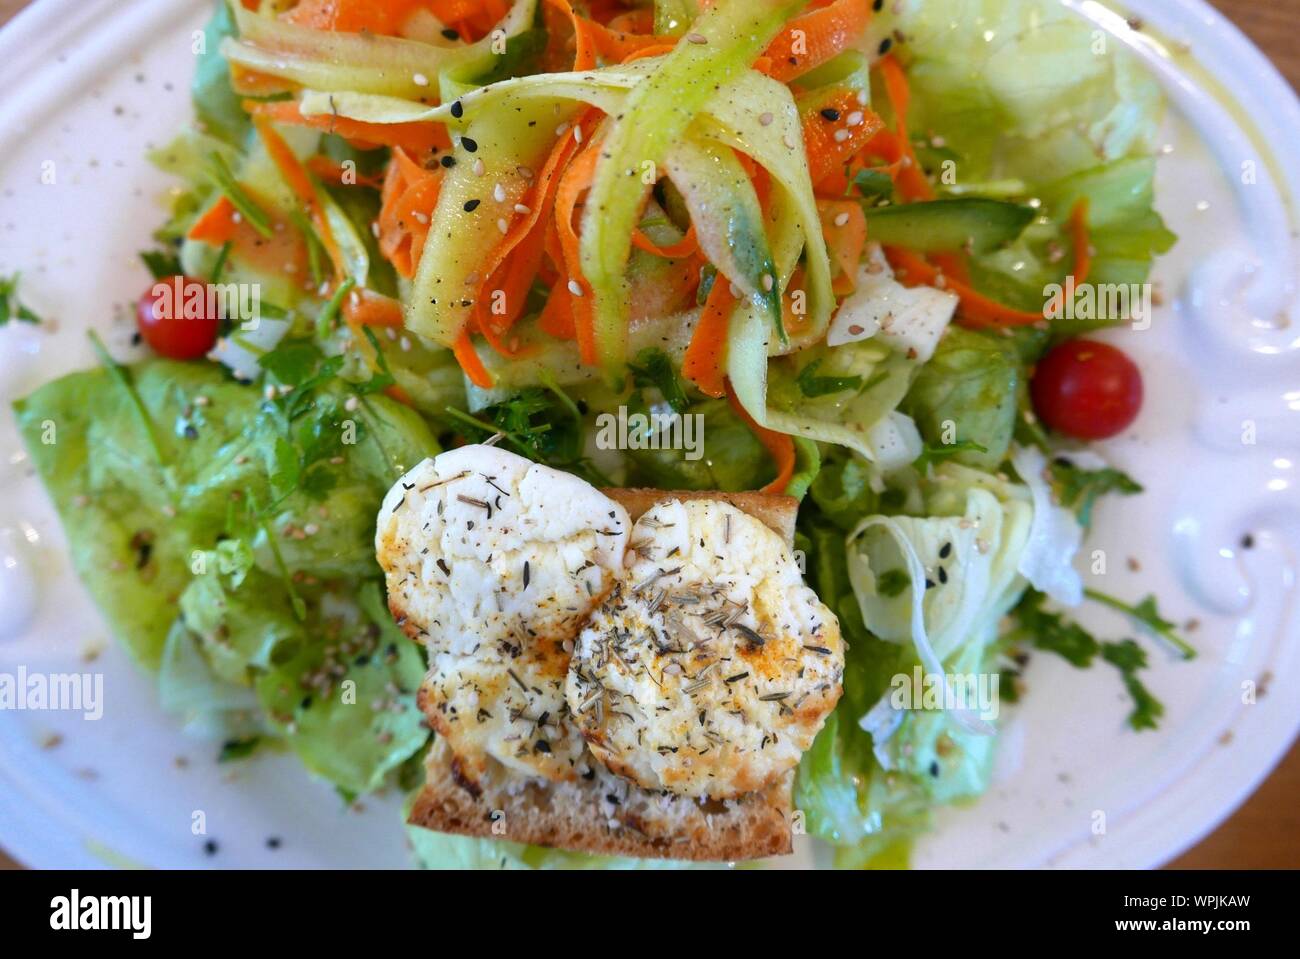 High Angle View Of Salads With Crouton On Plate Stock Photo